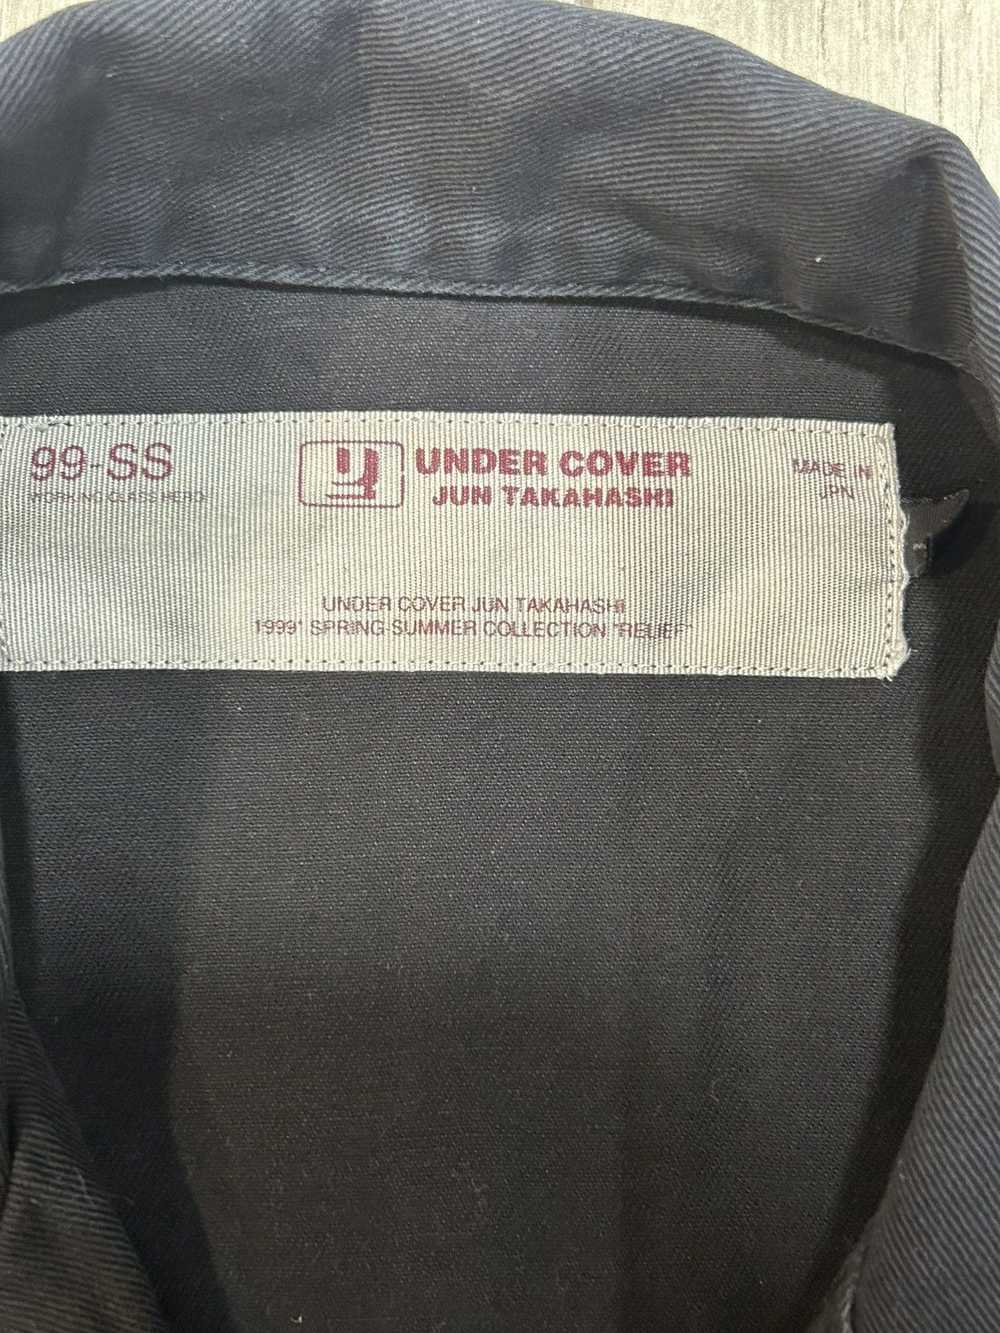 Undercover Undercover SS99 Military Groupie Button - image 3